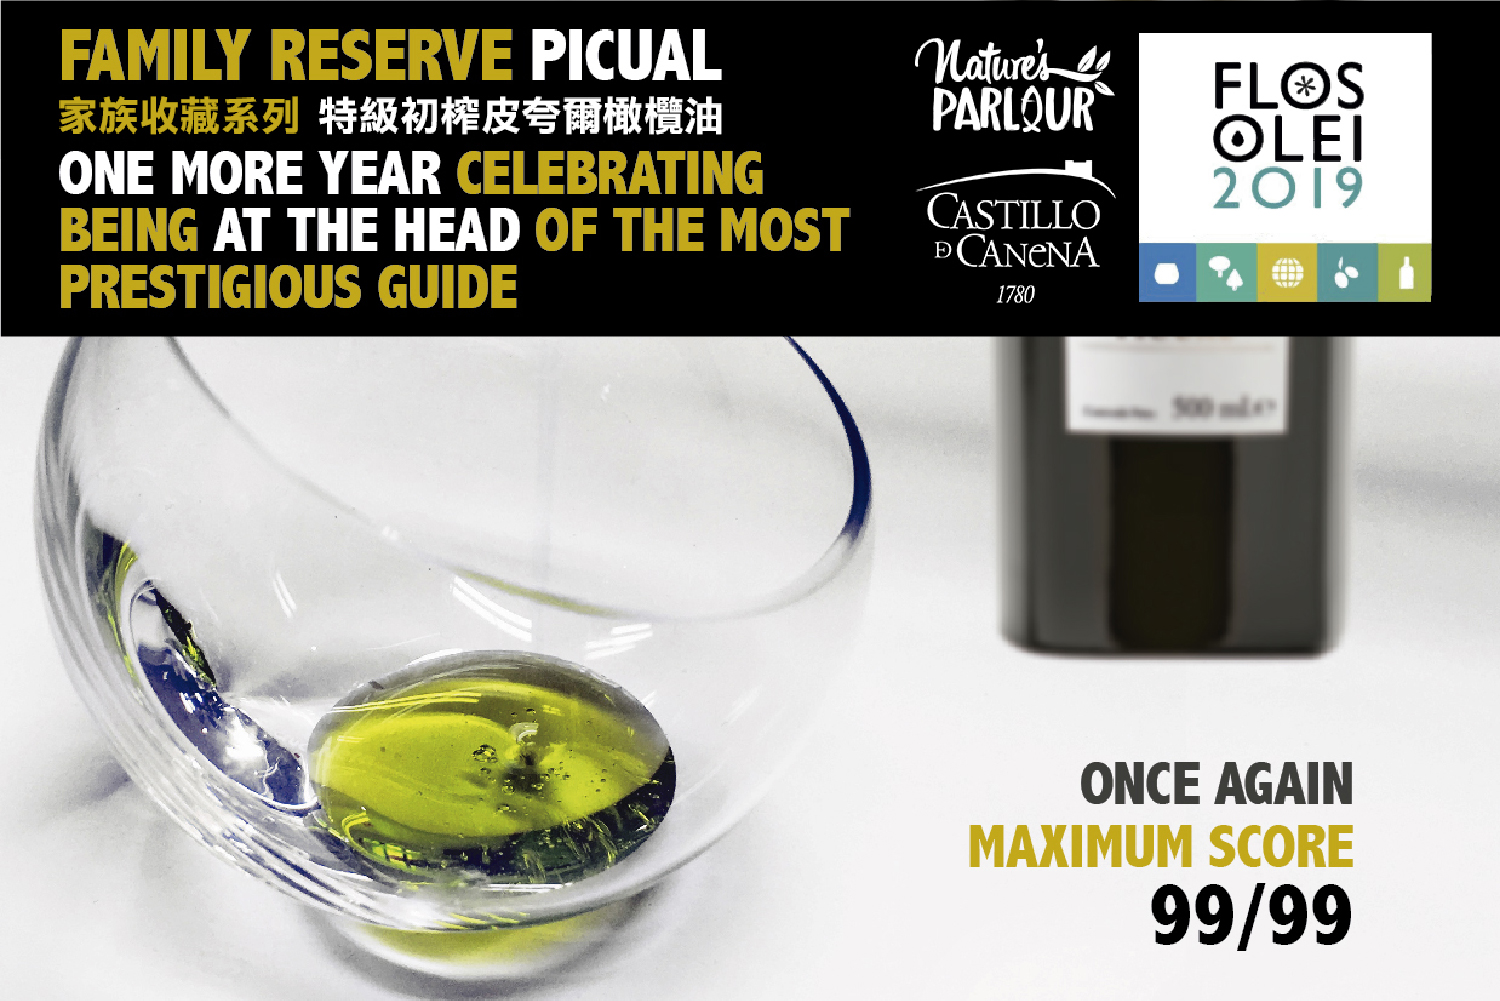 Flos Olei Guide 2019 - Family Reserve Picual (99/99)